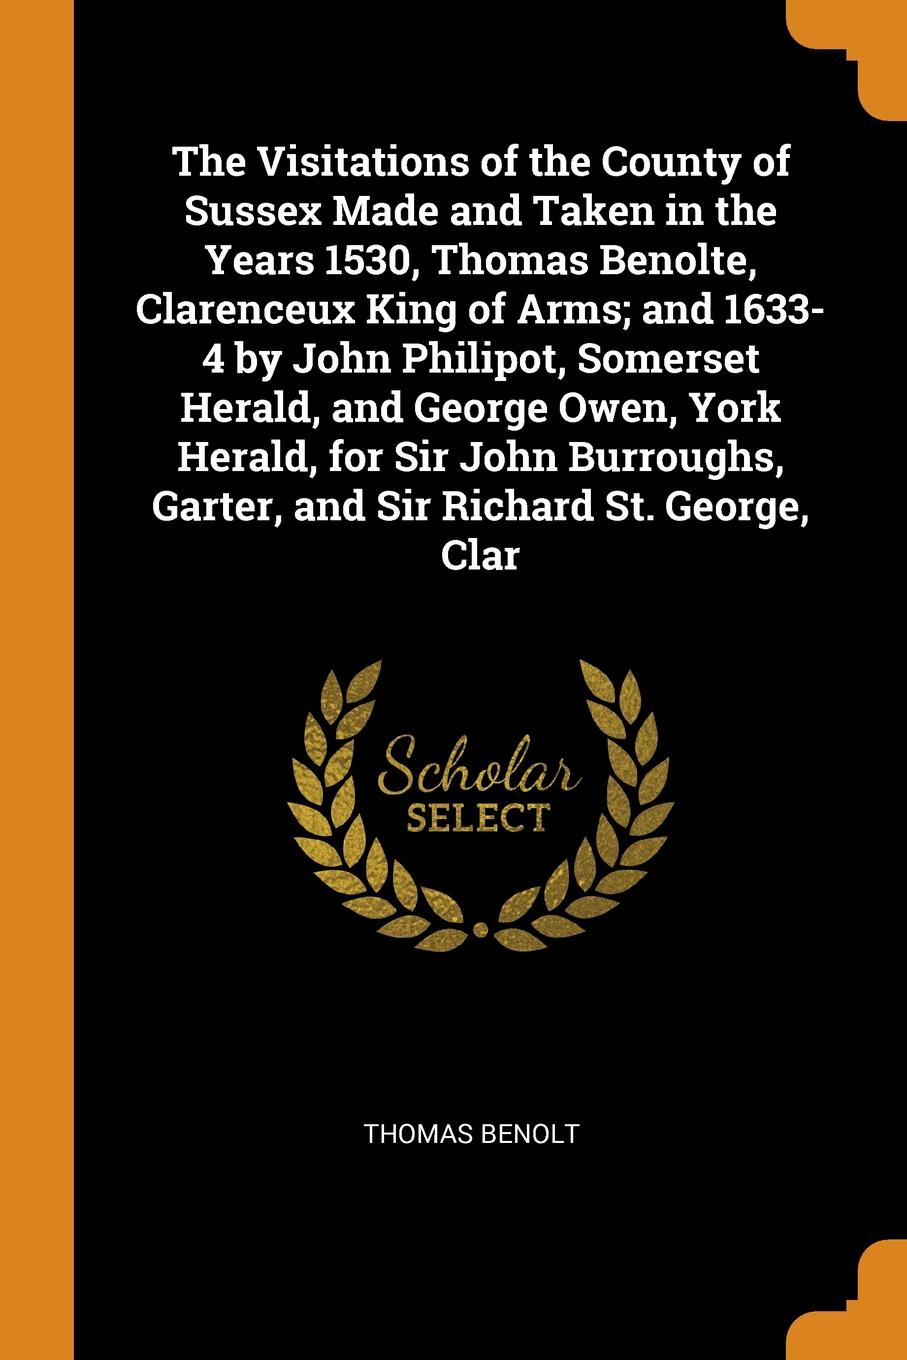 The Visitations of the County of Sussex Made and Taken in the Years 1530, Thomas Benolte, Clarenceux King of Arms; and 1633-4 by John Philipot, Somerset Herald, and George Owen, York Herald, for Sir John Burroughs, Garter, and Sir Richard St. Geor...